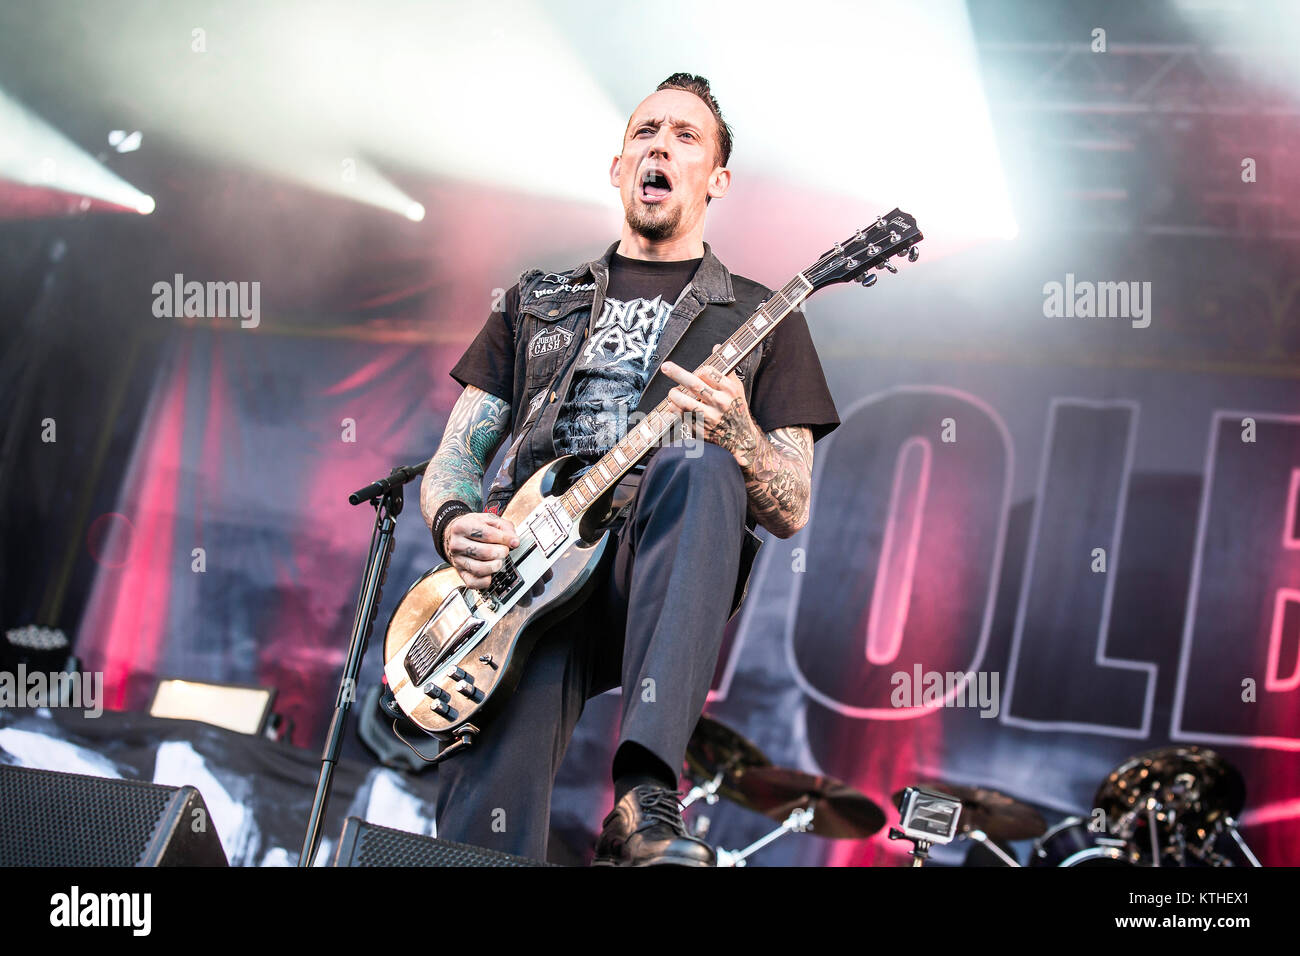 The Danish hard rock band Volbeat performs a live concert at the Norwegian  music festival Tons of Rock 2014 in Halden. Here vocalist and guitarist  Michael Poulsen is seen live on stage.